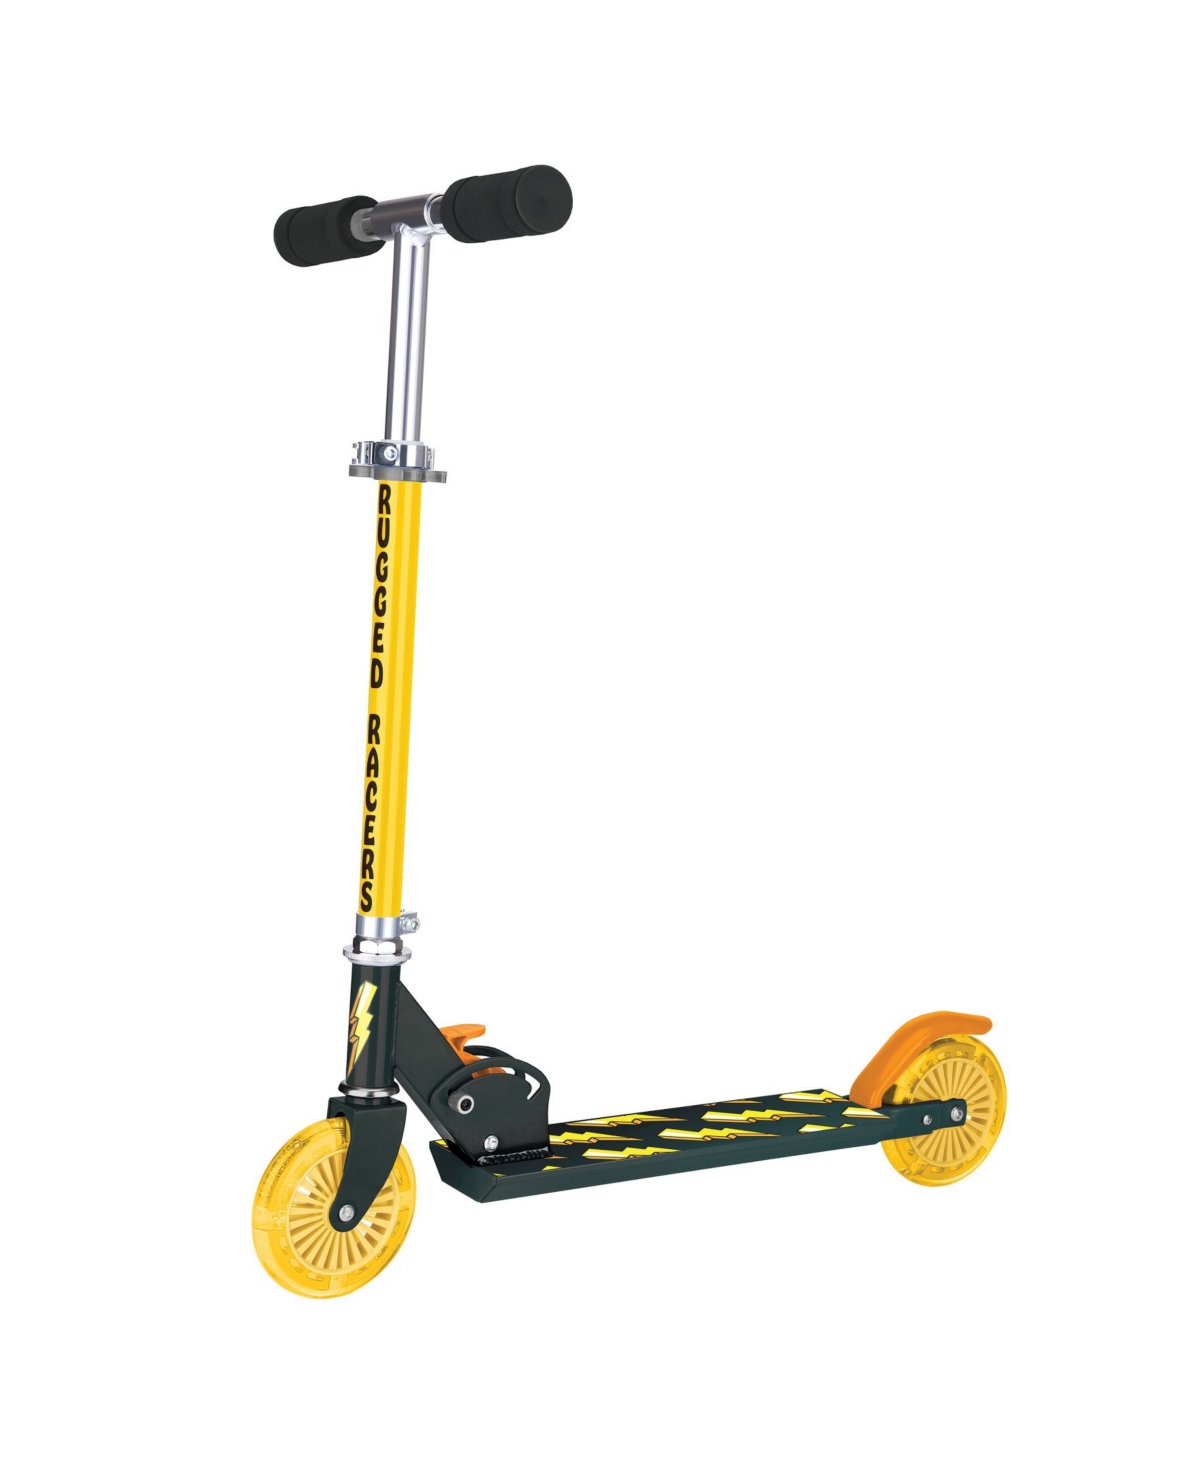 Rugged Racers 2 Wheel Led Kick Scooter In Yellow